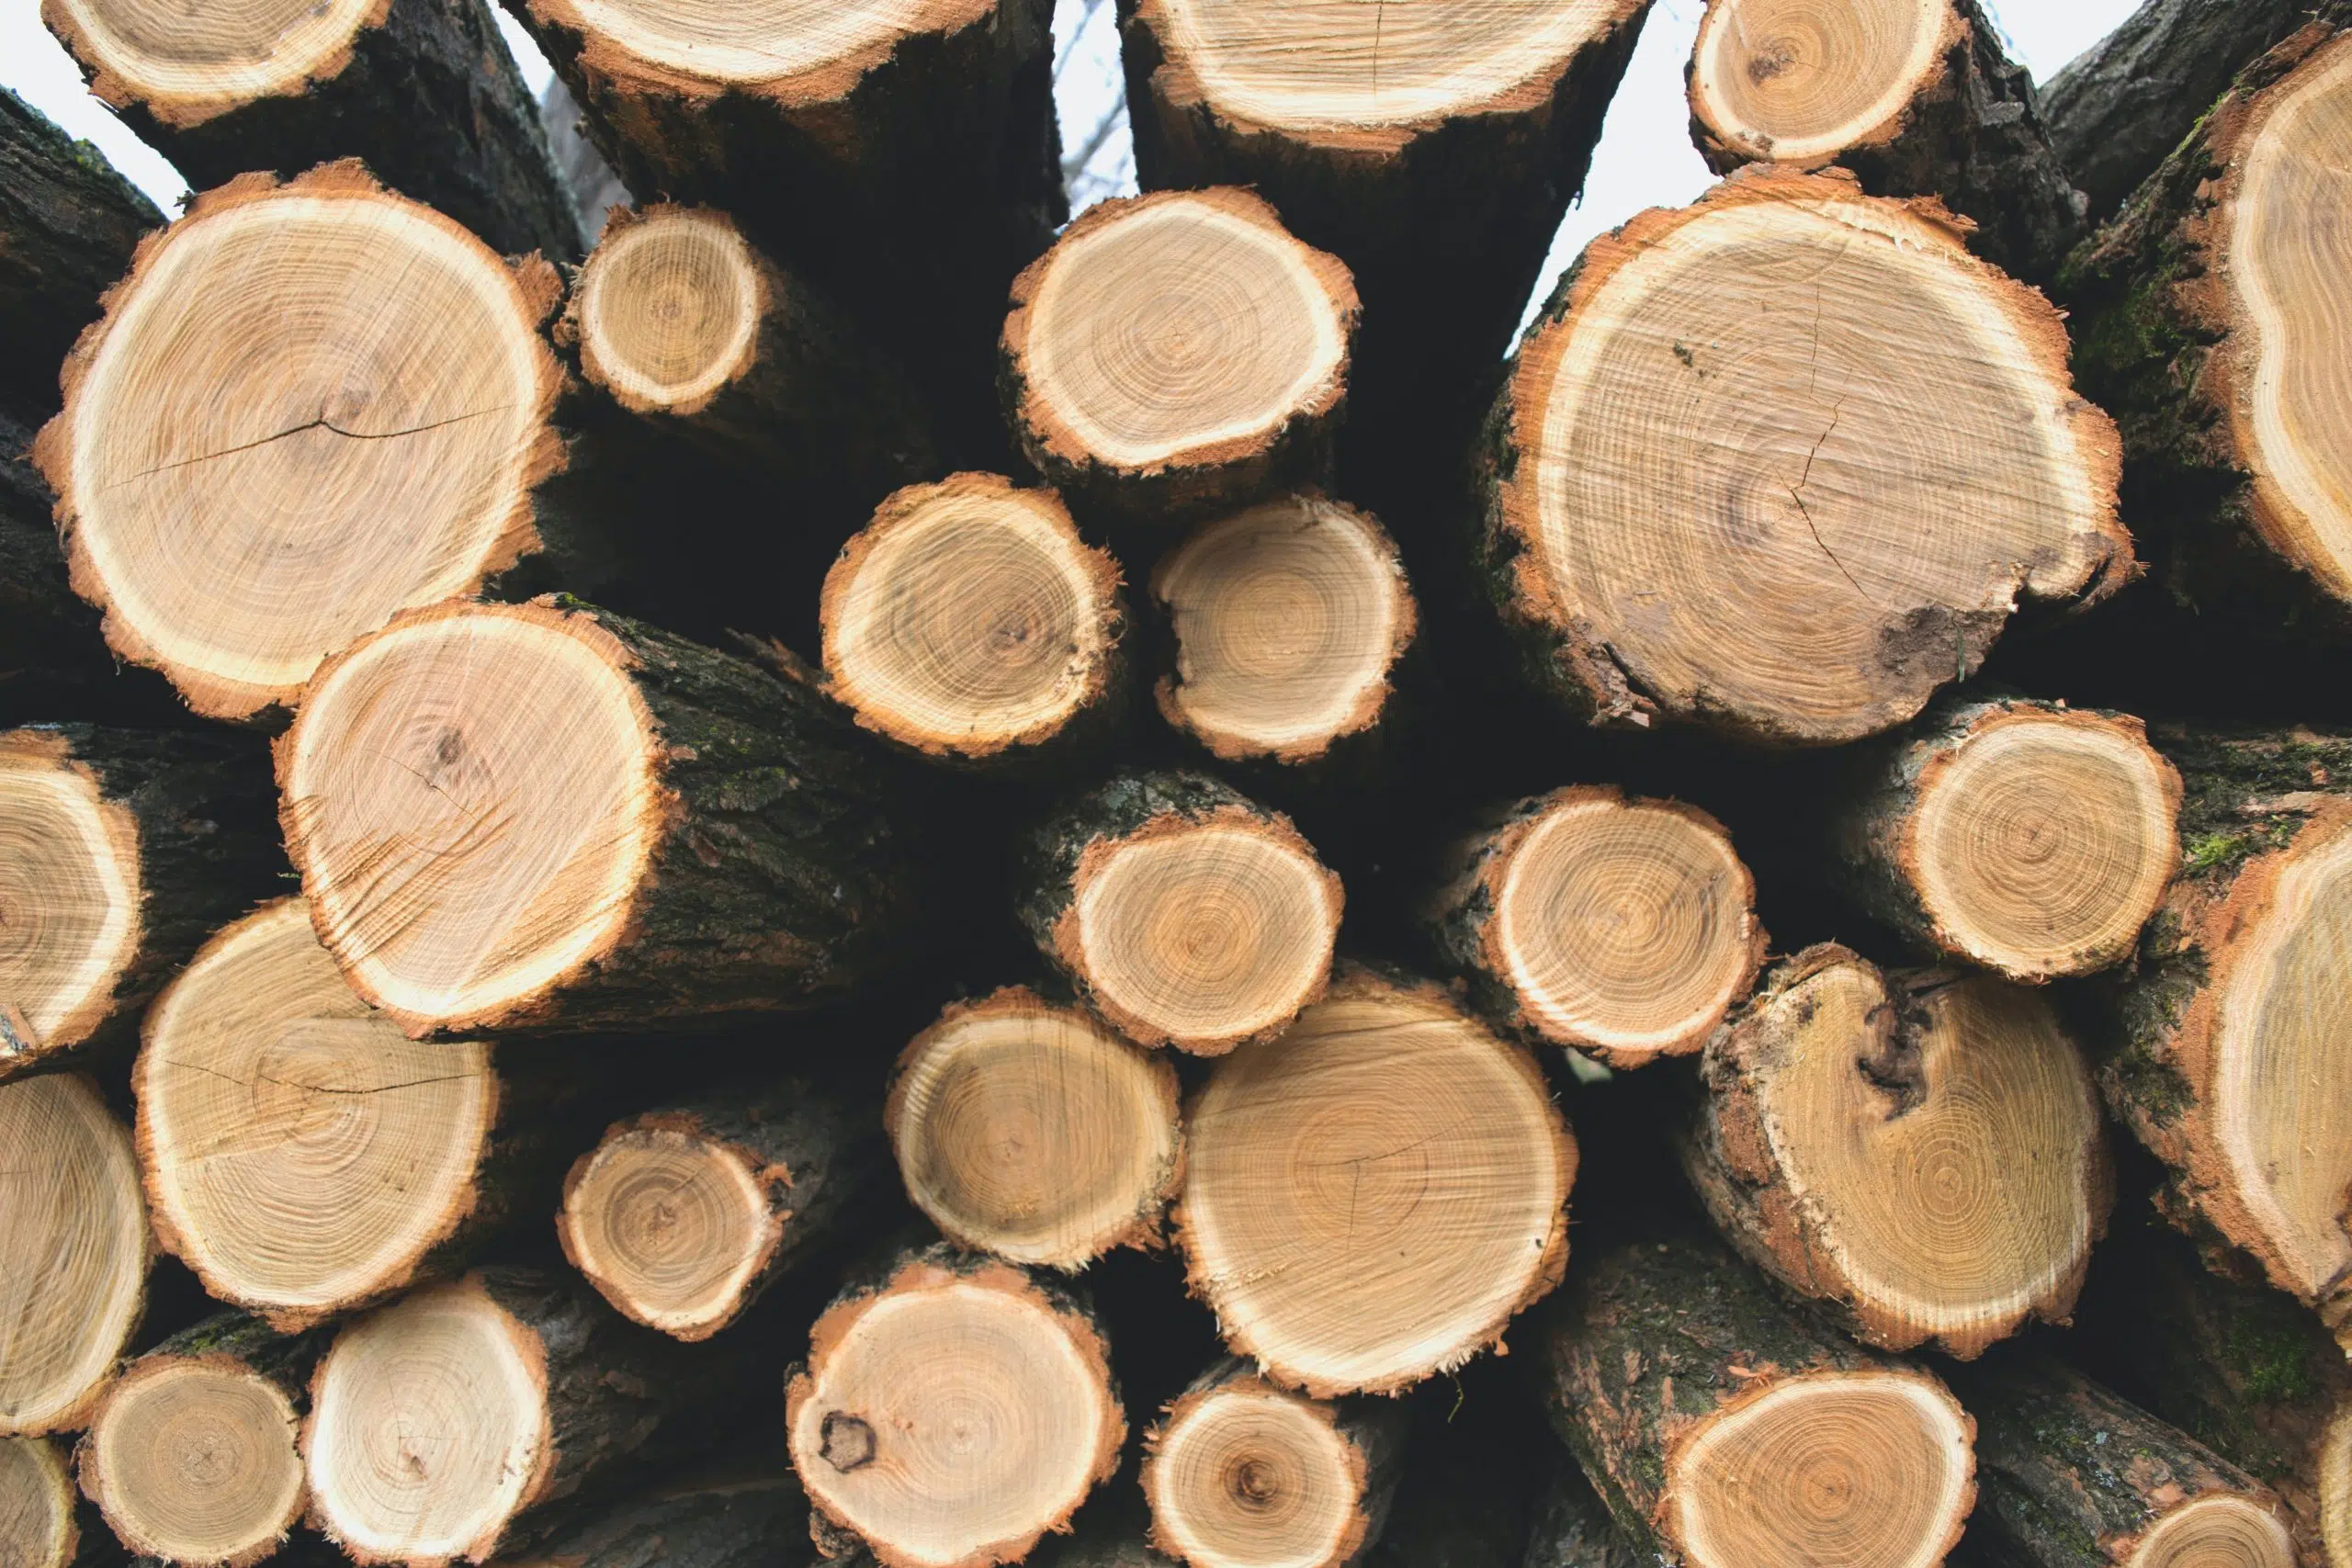 Canada Formally Challenges U.S. Softwood Lumber Duties